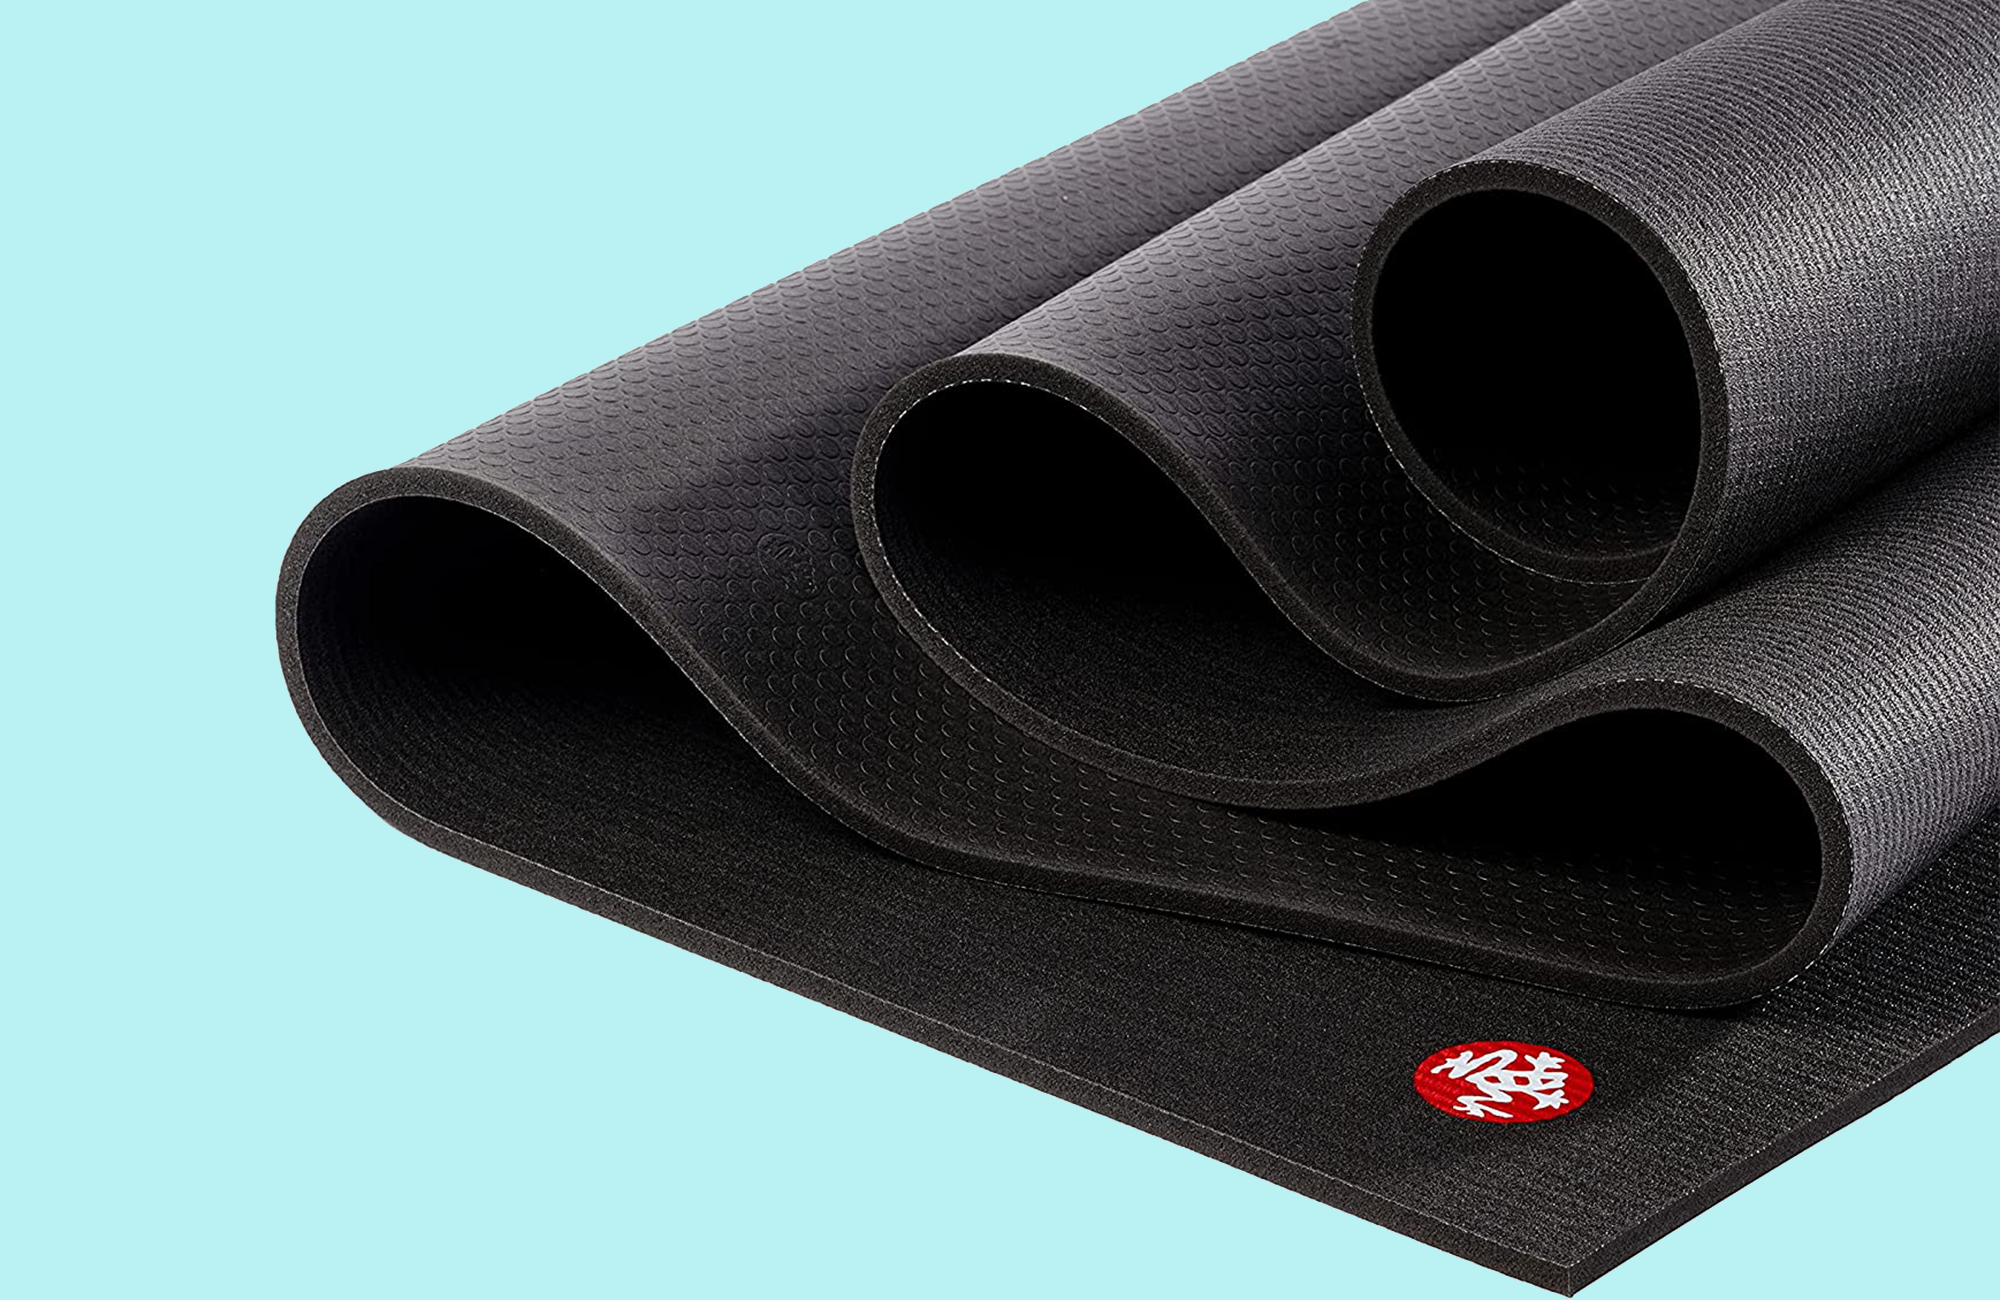 Why You Need an Extra Large Yoga Prop Bag – Love My Mat